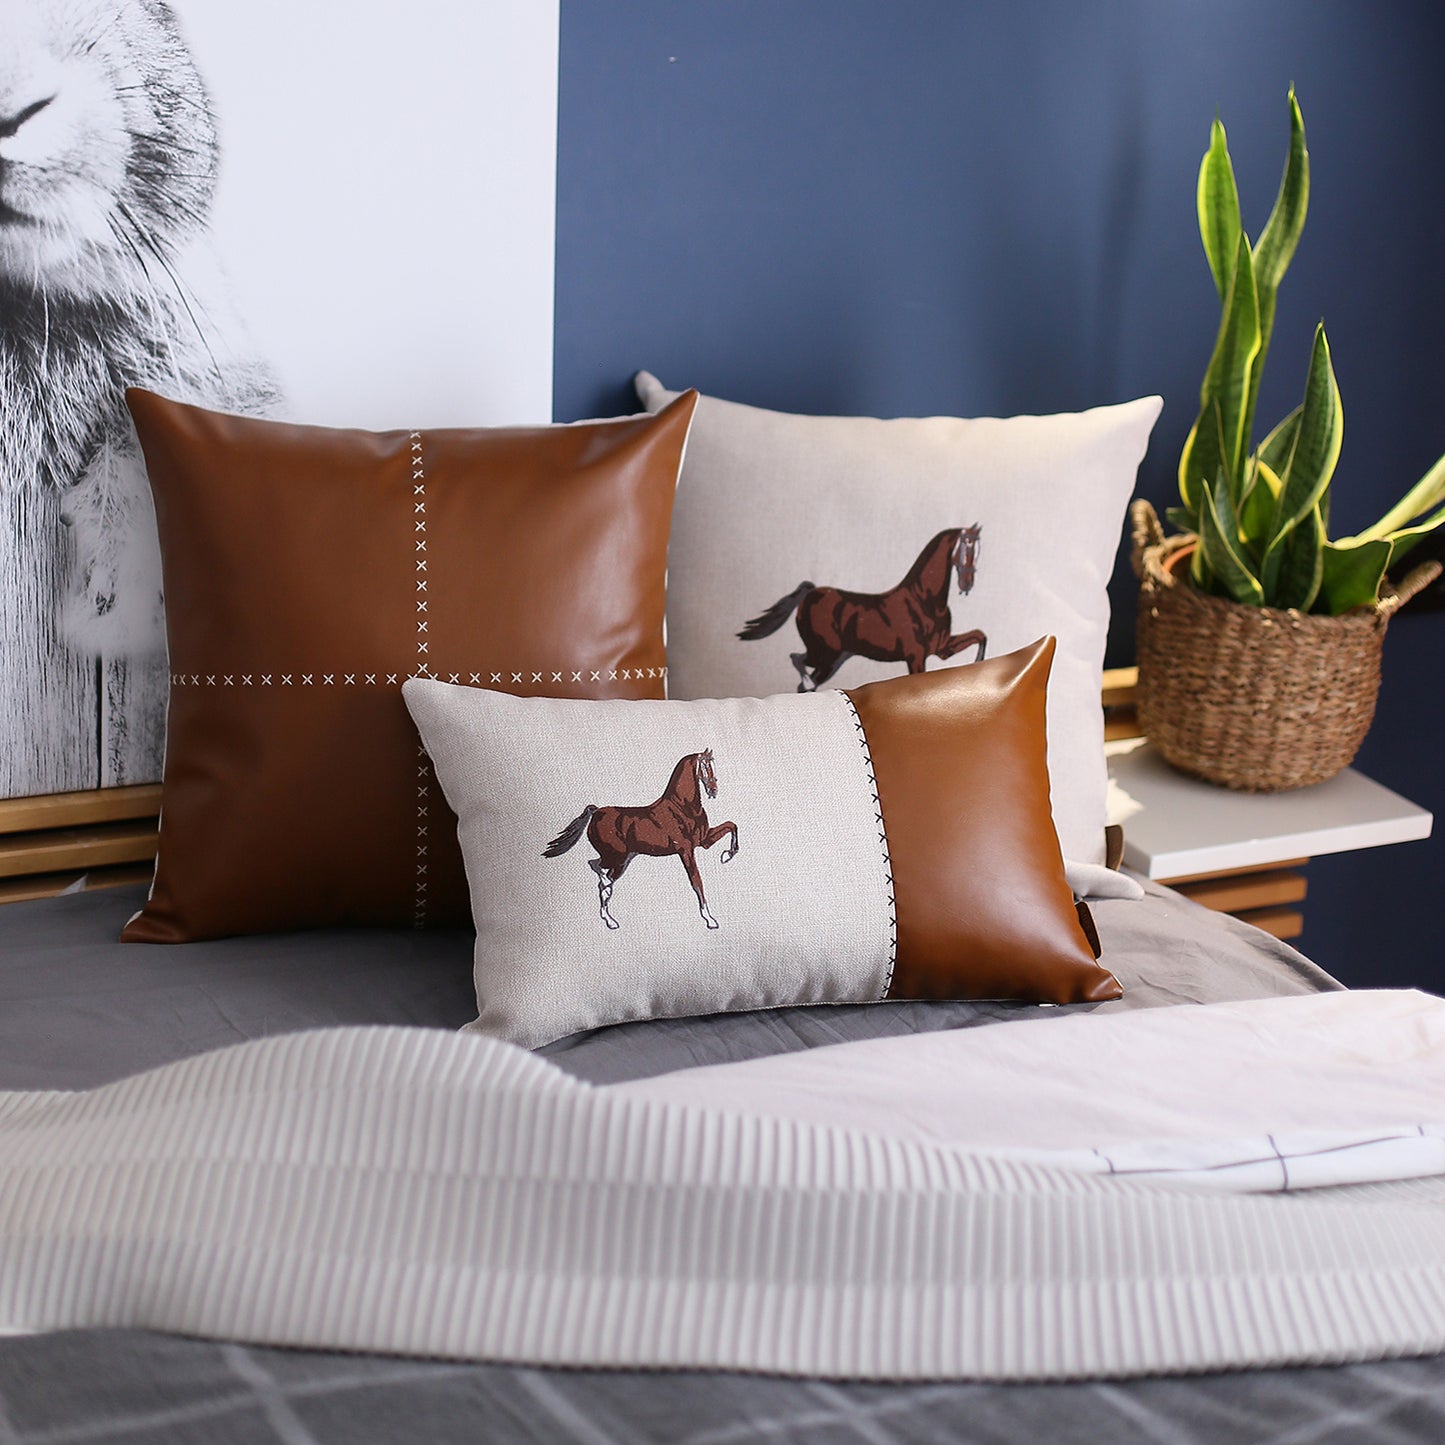 Boho Embroidered Horse Set of 4 Throw Pillow 18" x 18" Solid Beige & Brown Square for Couch, Bedding